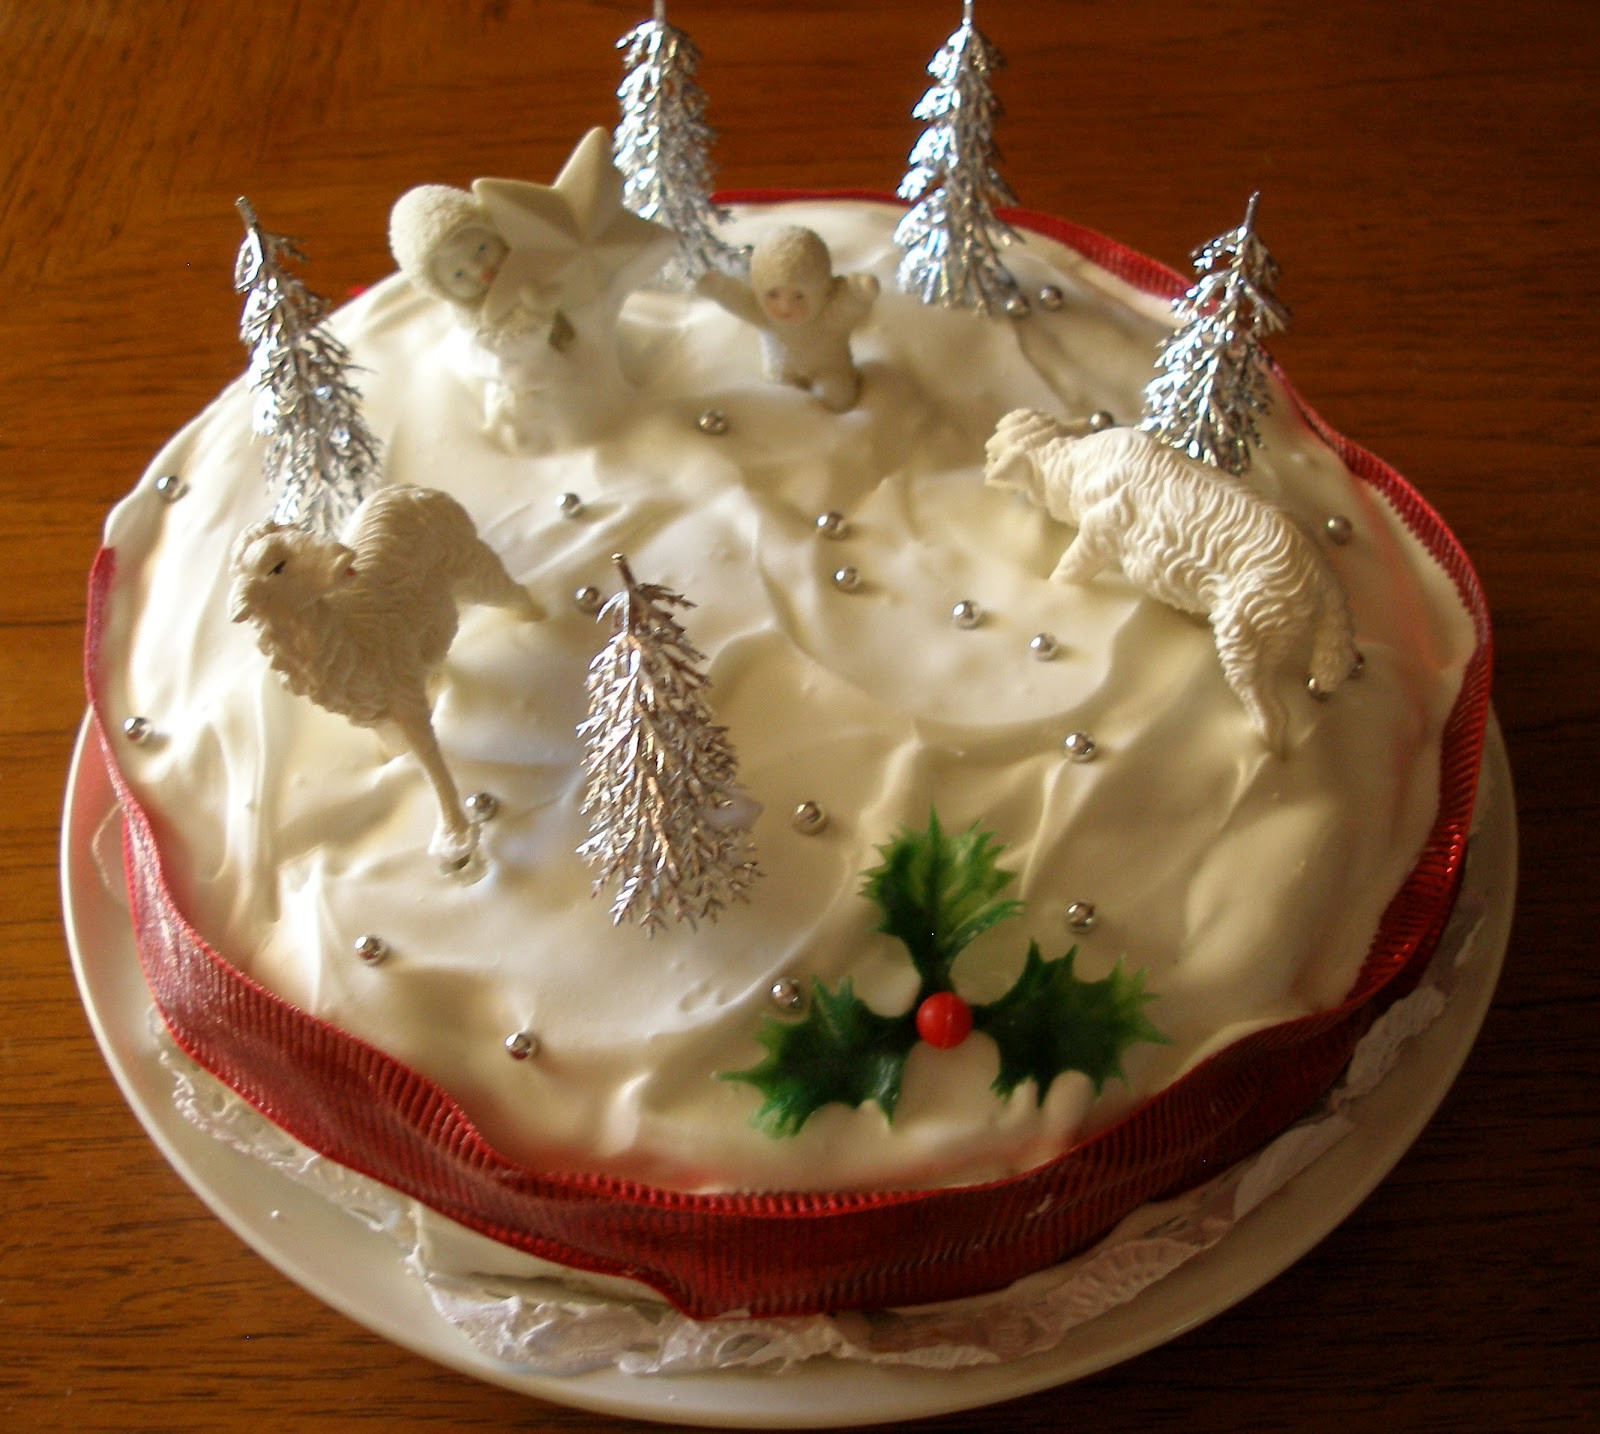 Recipes For Christmas Cakes
 The Knitting Blog by Mr Puffy the Dog A Traditional